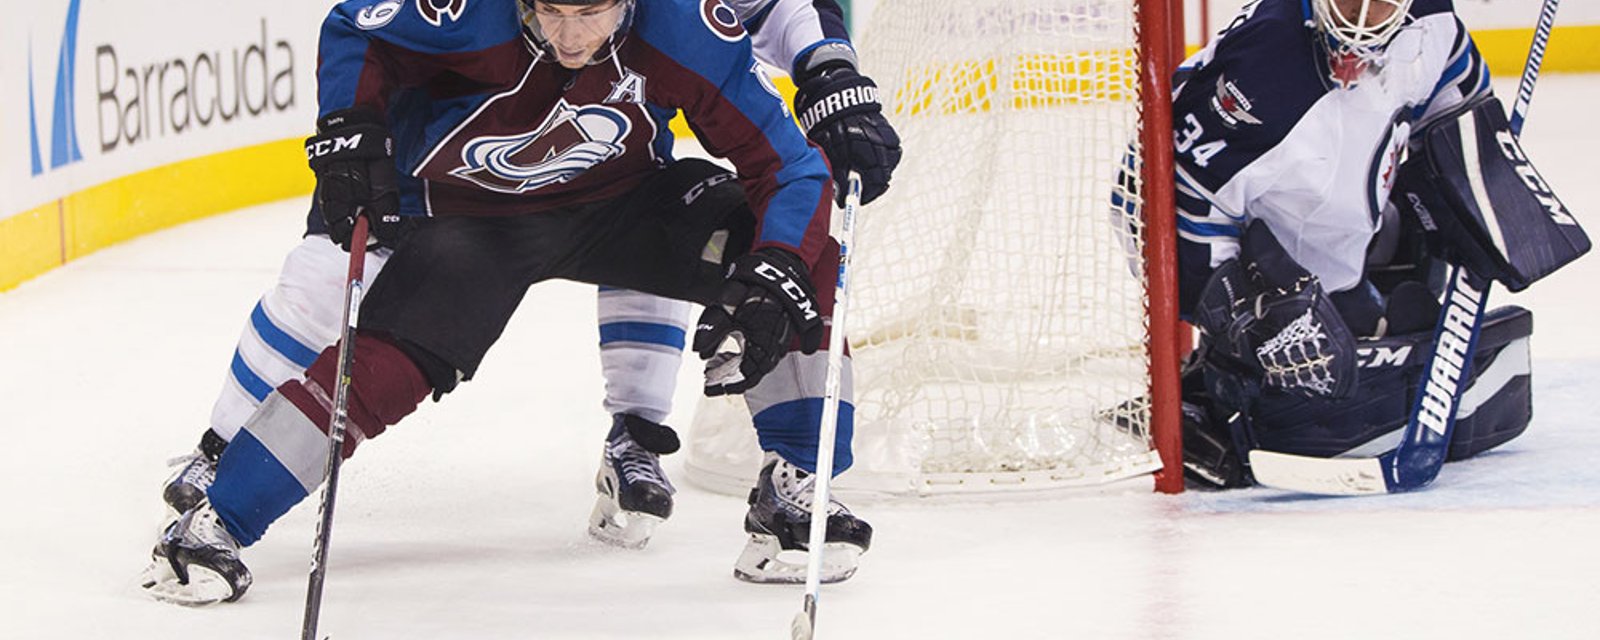 Report: A new team enters the Duchene sweepstakes